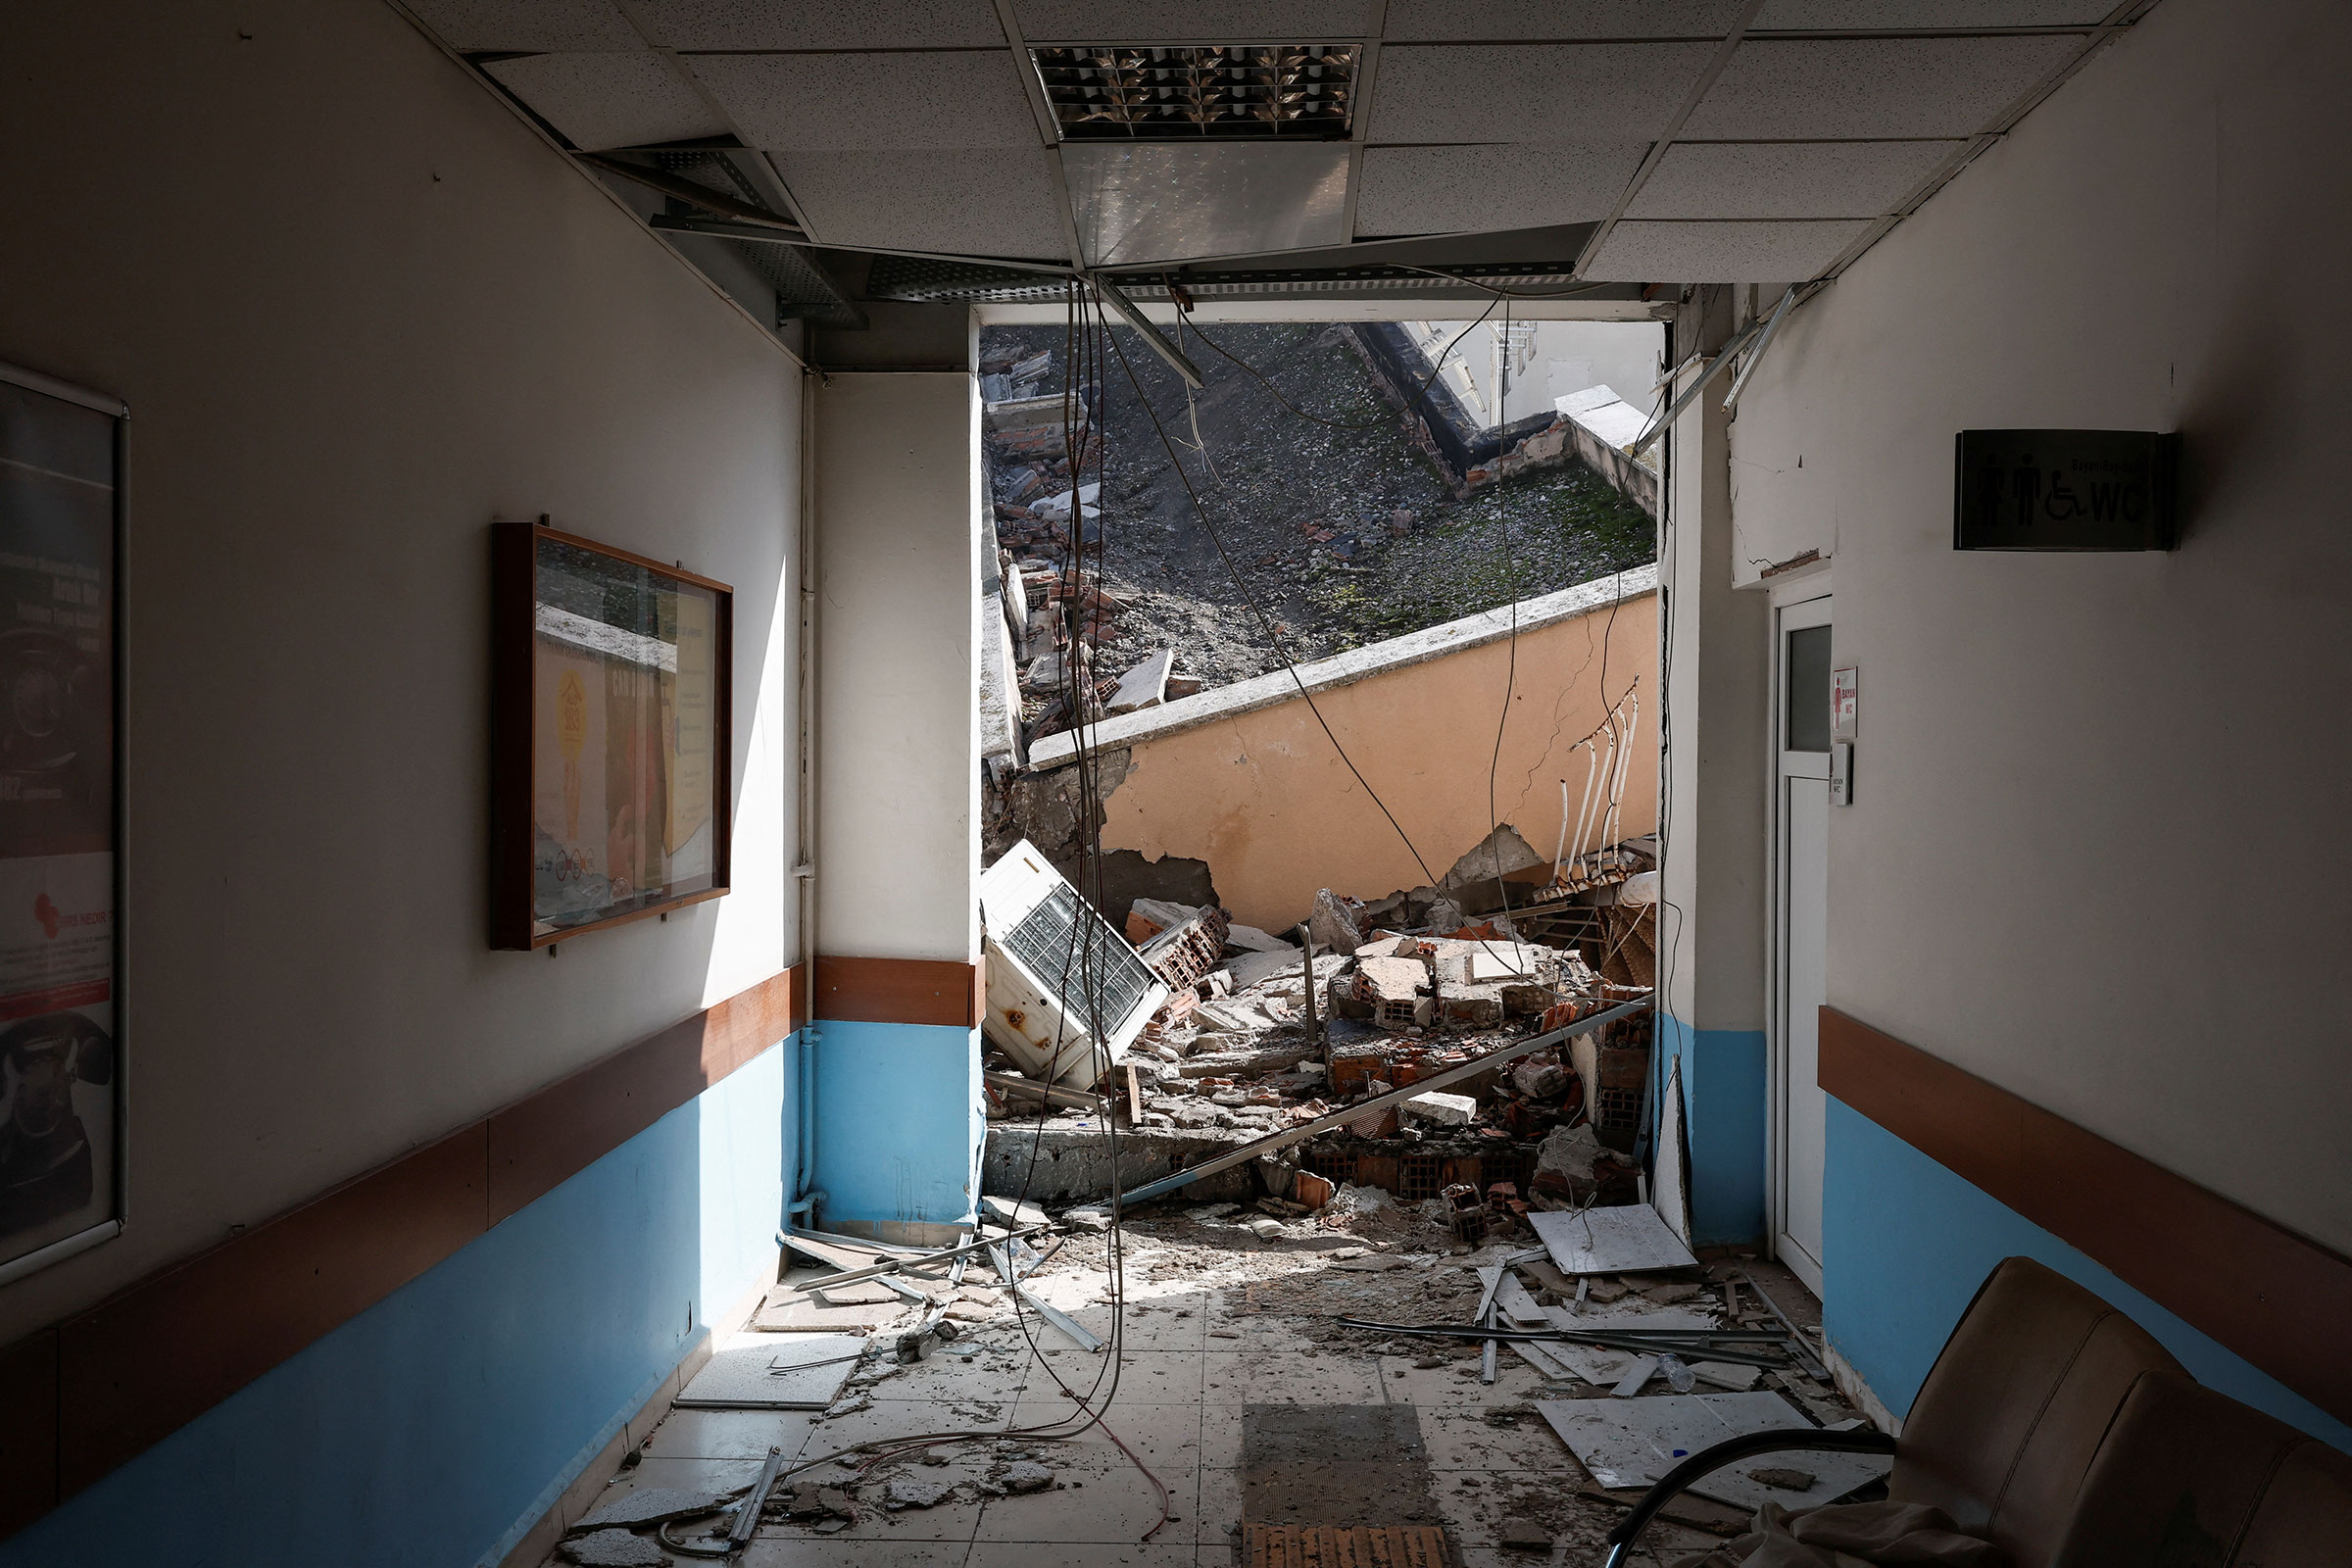 A view of the intensive care unit of the collapsed state hospital following an earthquake in Iskenderun, district of Hatay, Turkey, on Feb. 7, 2023. (Benoit Tessier—Reuters)